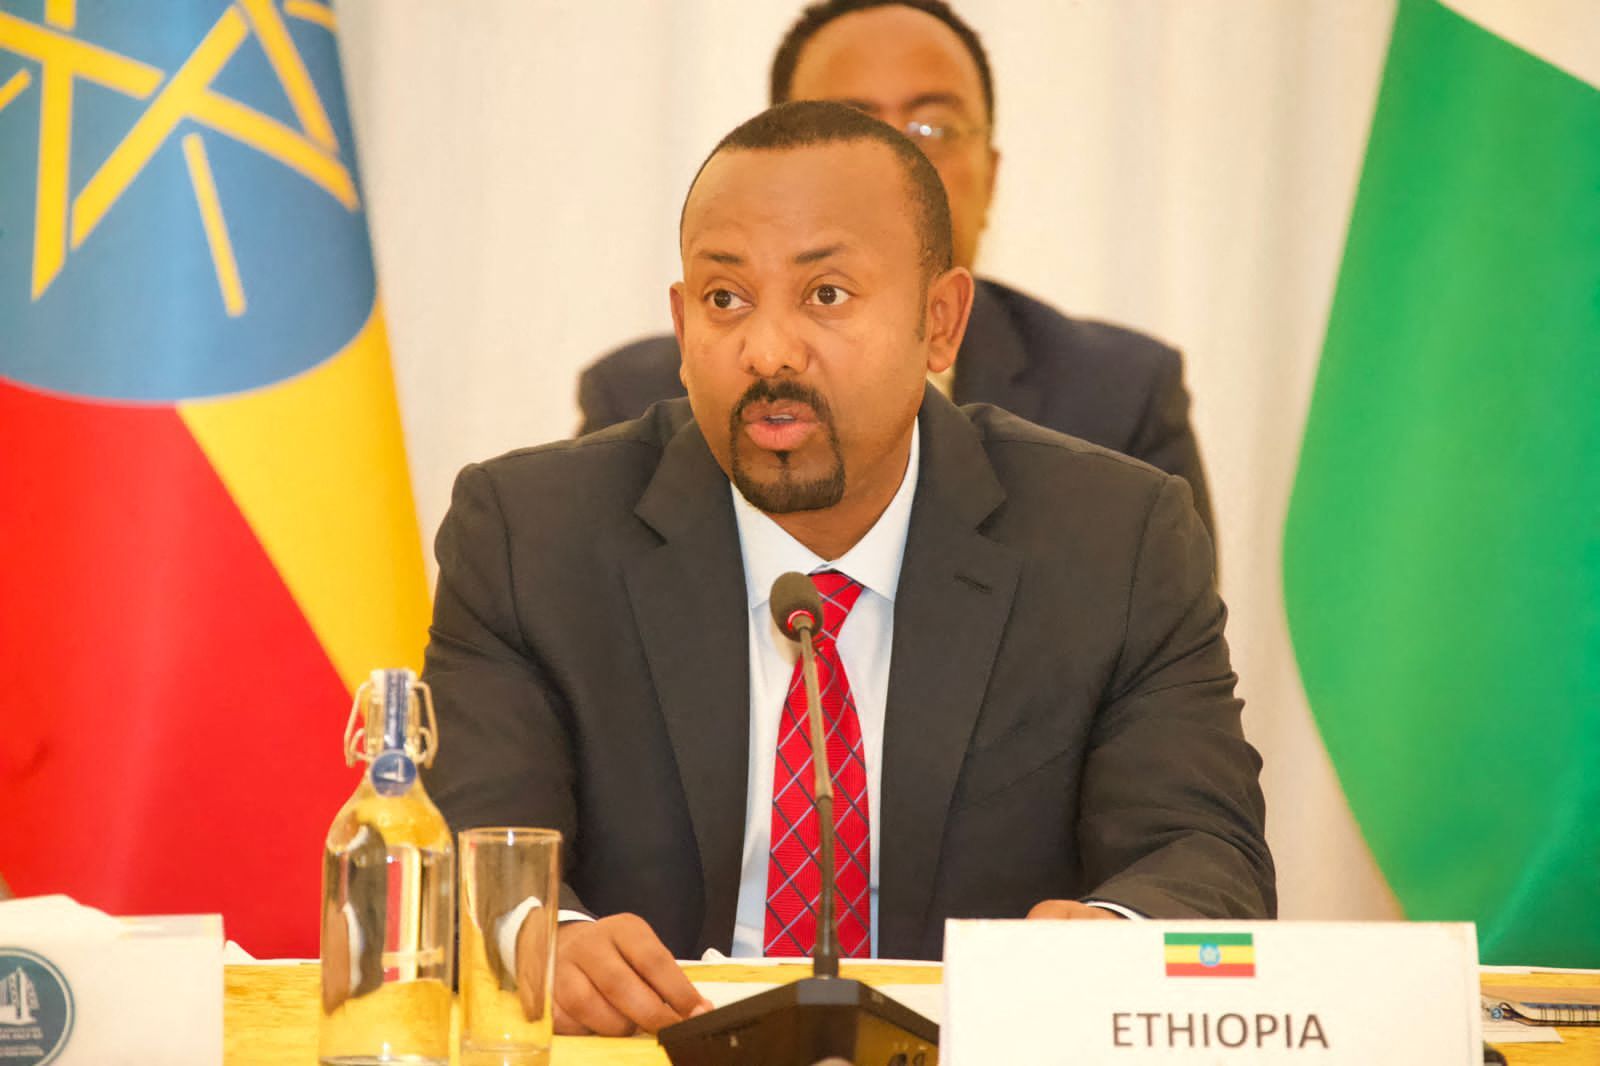 Ethiopia pulls out of IGAD extraordinary summit amid regional tensions